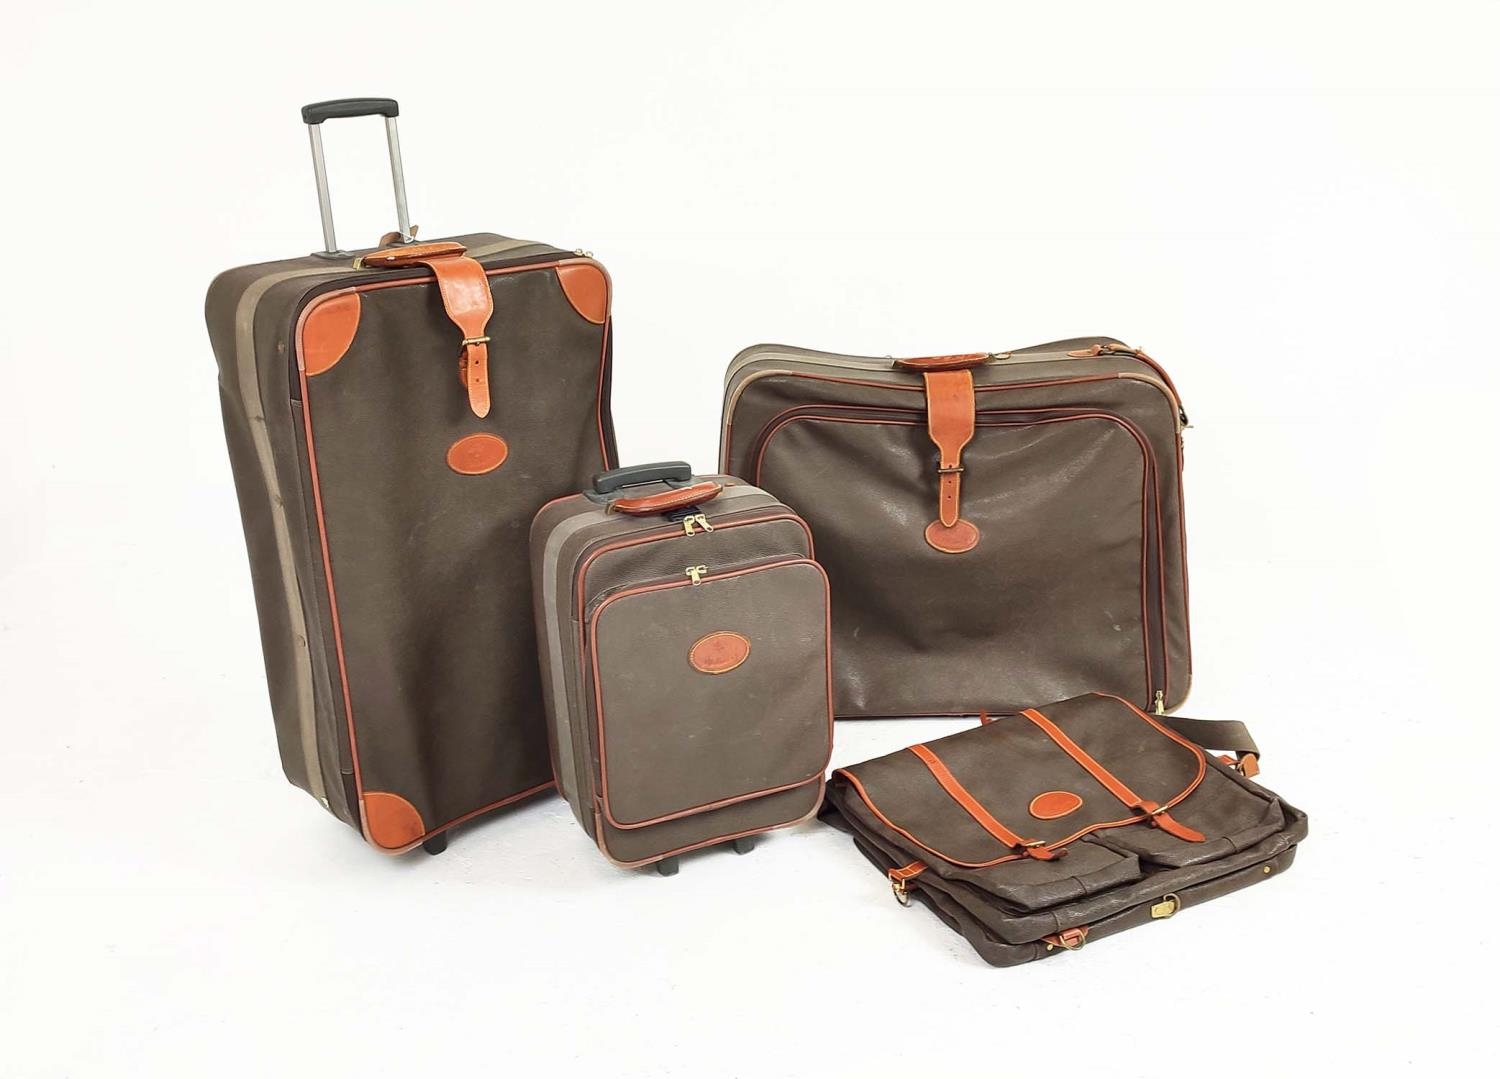 MULBERRY VINTAGE TRAVEL SET, scotchgrain with tan leather trims and handles, two trolleys, one - Image 11 of 11